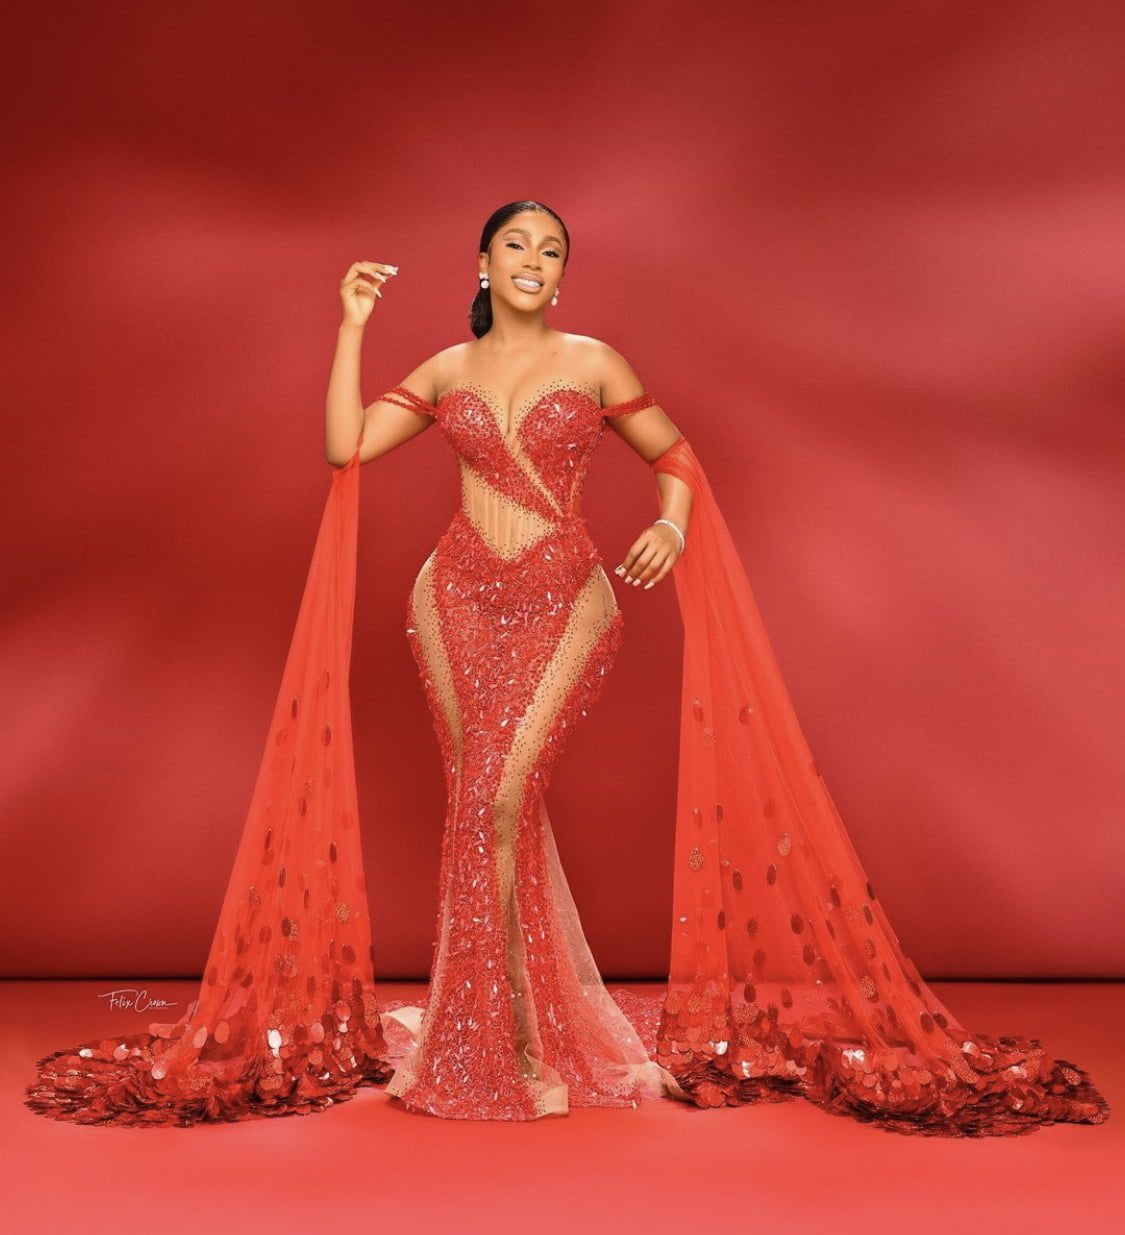 Mercy Eke stuns in red dress with dramatic sleeves.